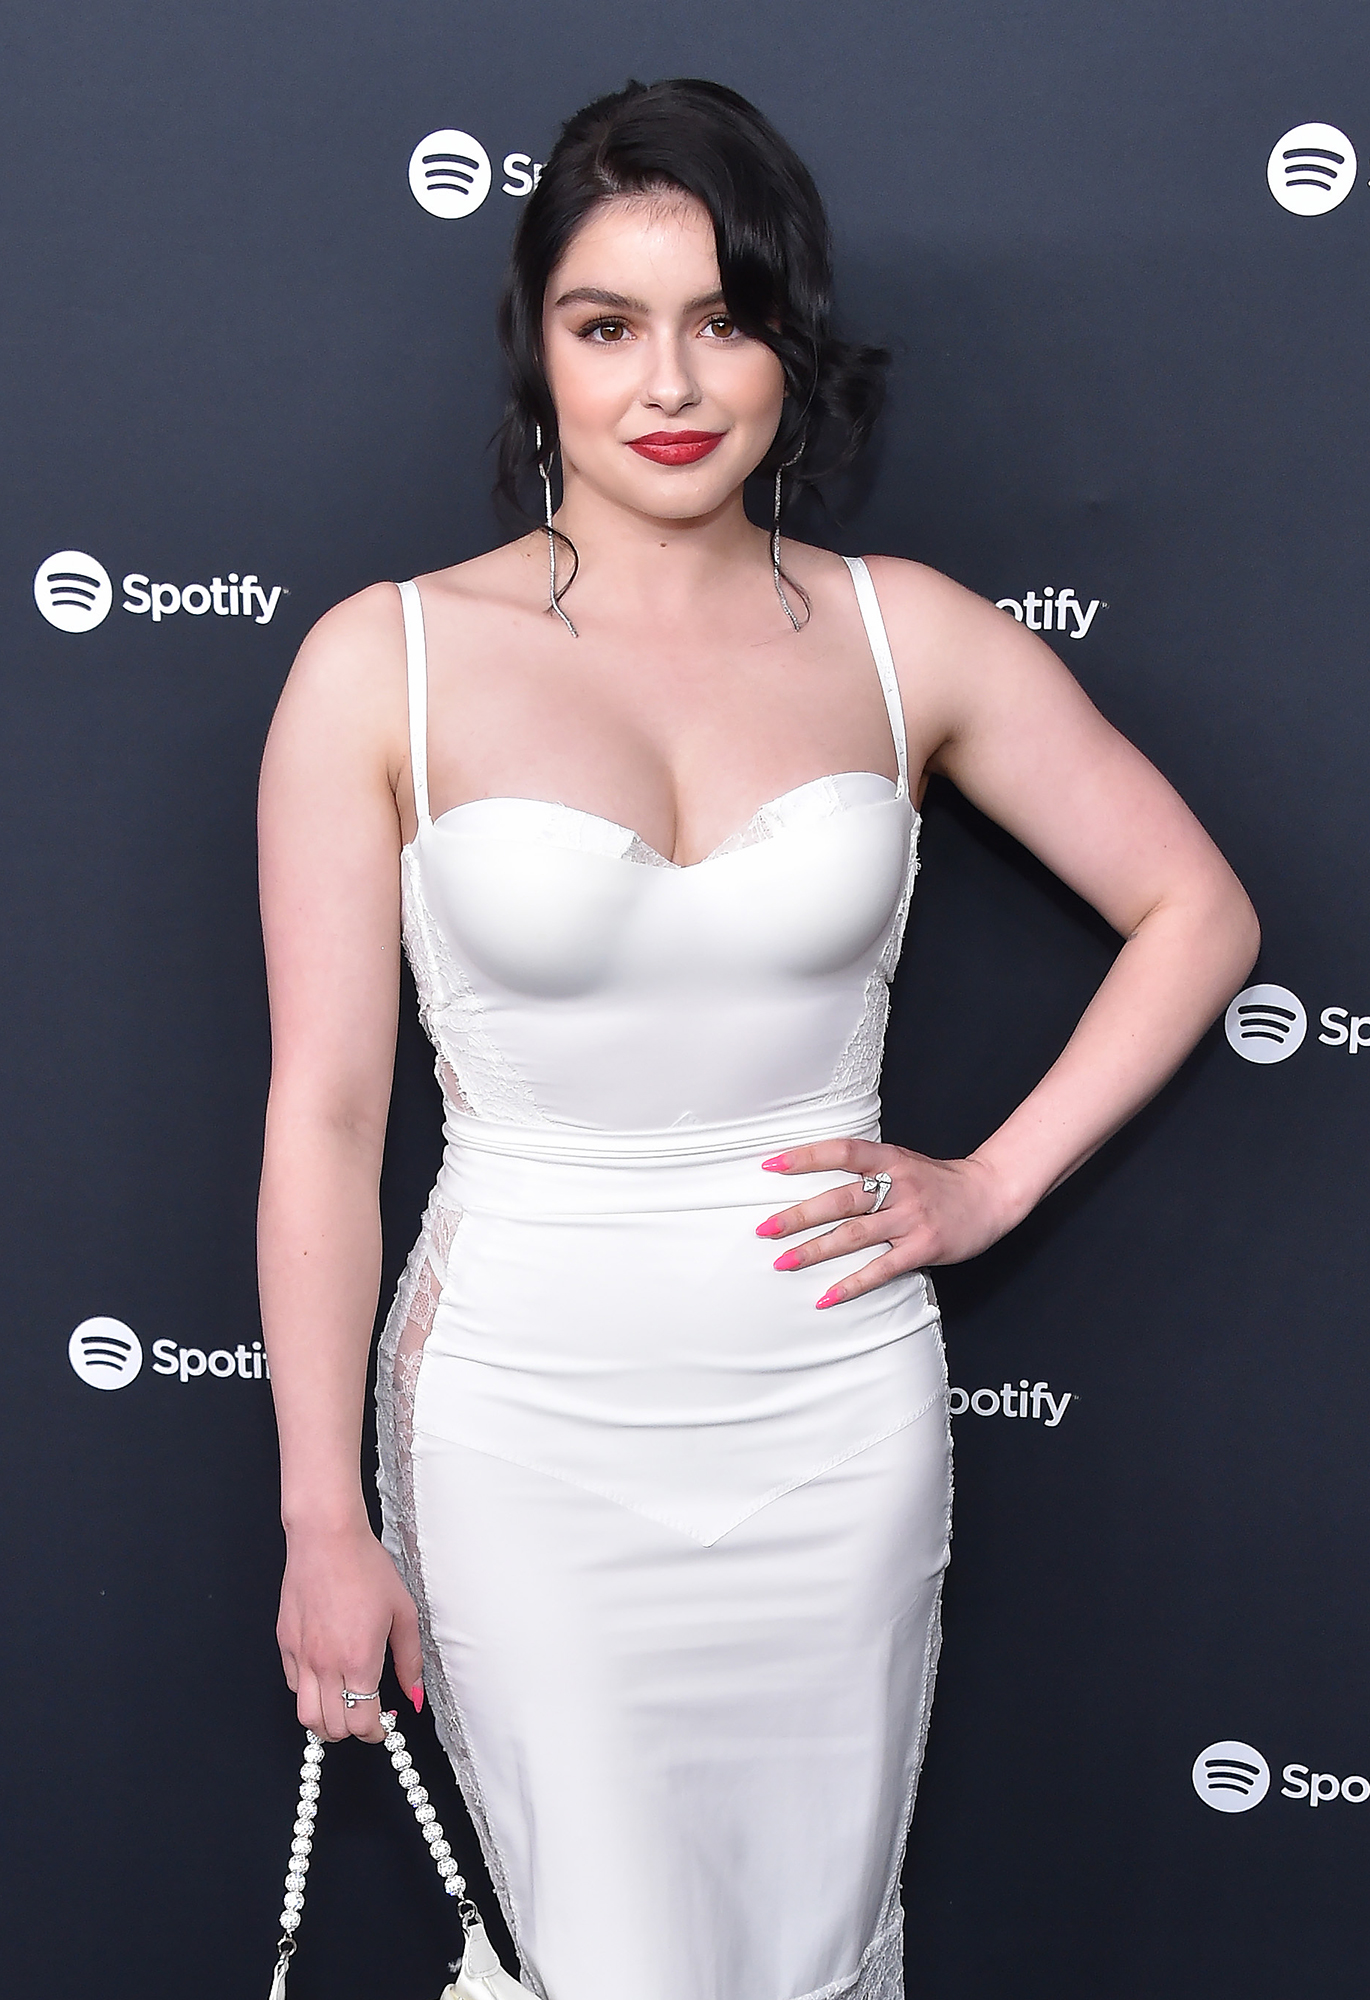 Ariel Winter on Mental Health, Trolls and Life After Modern Family